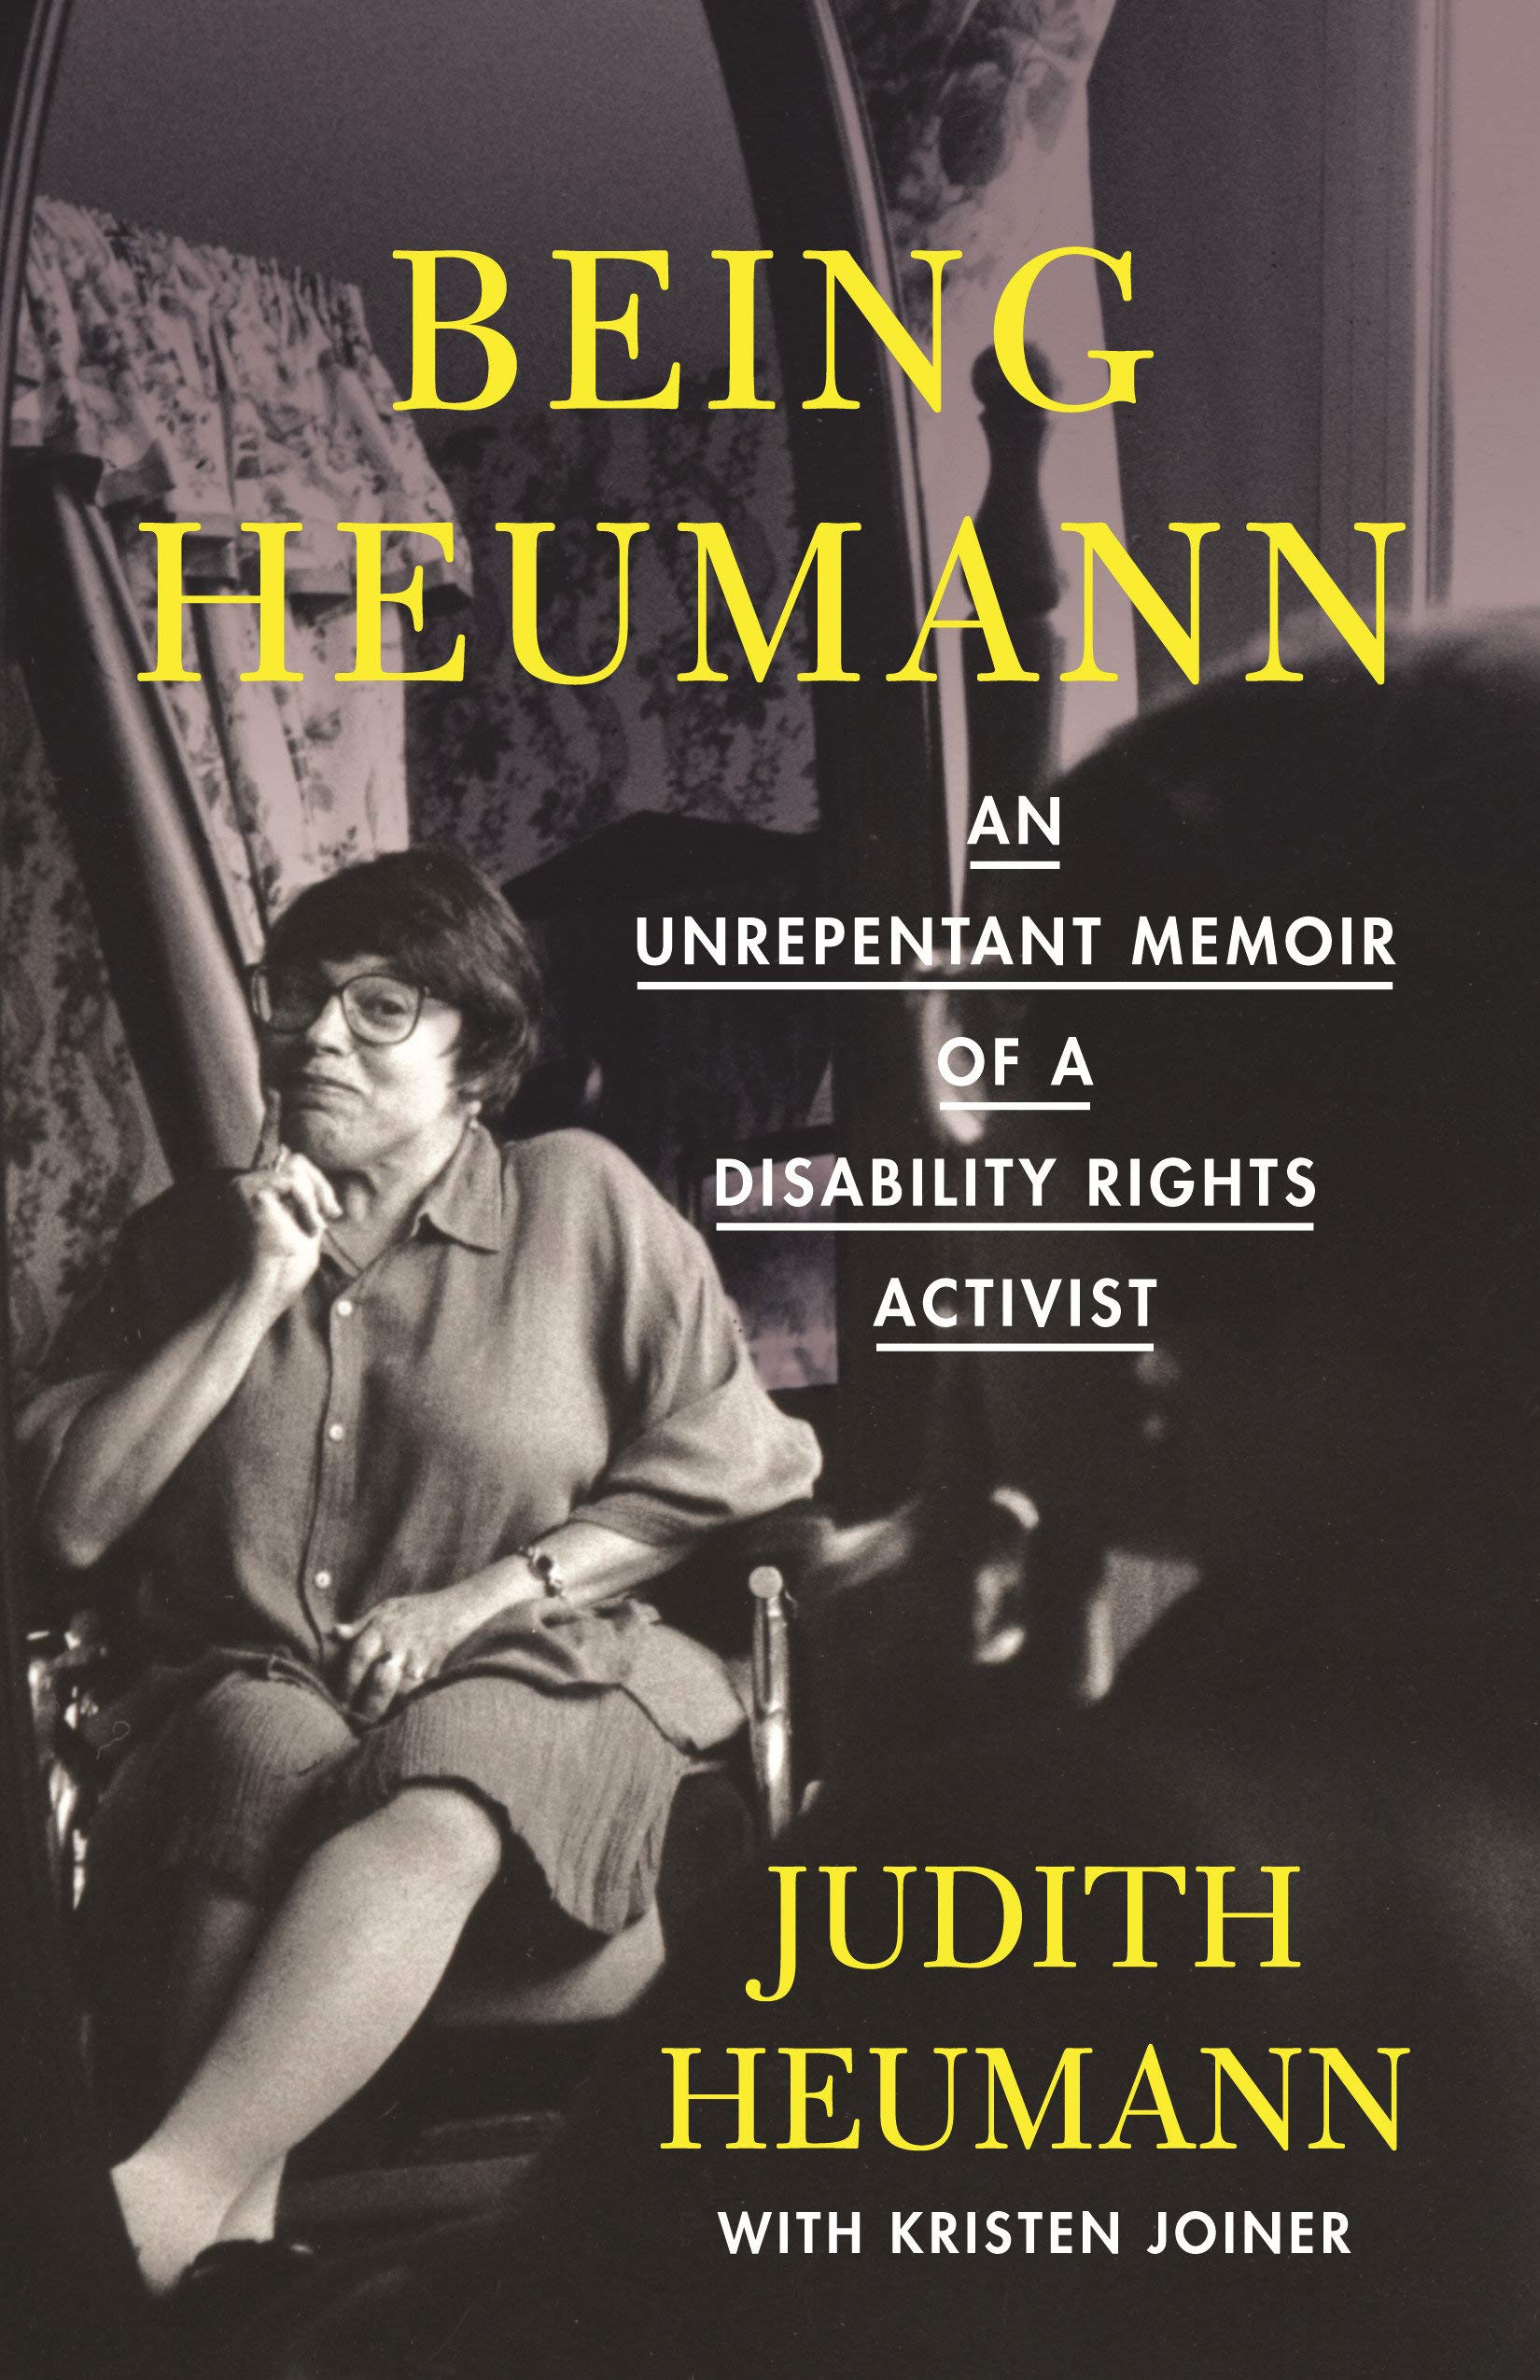 One Book One San Diego Book Discussion of Being Heumann